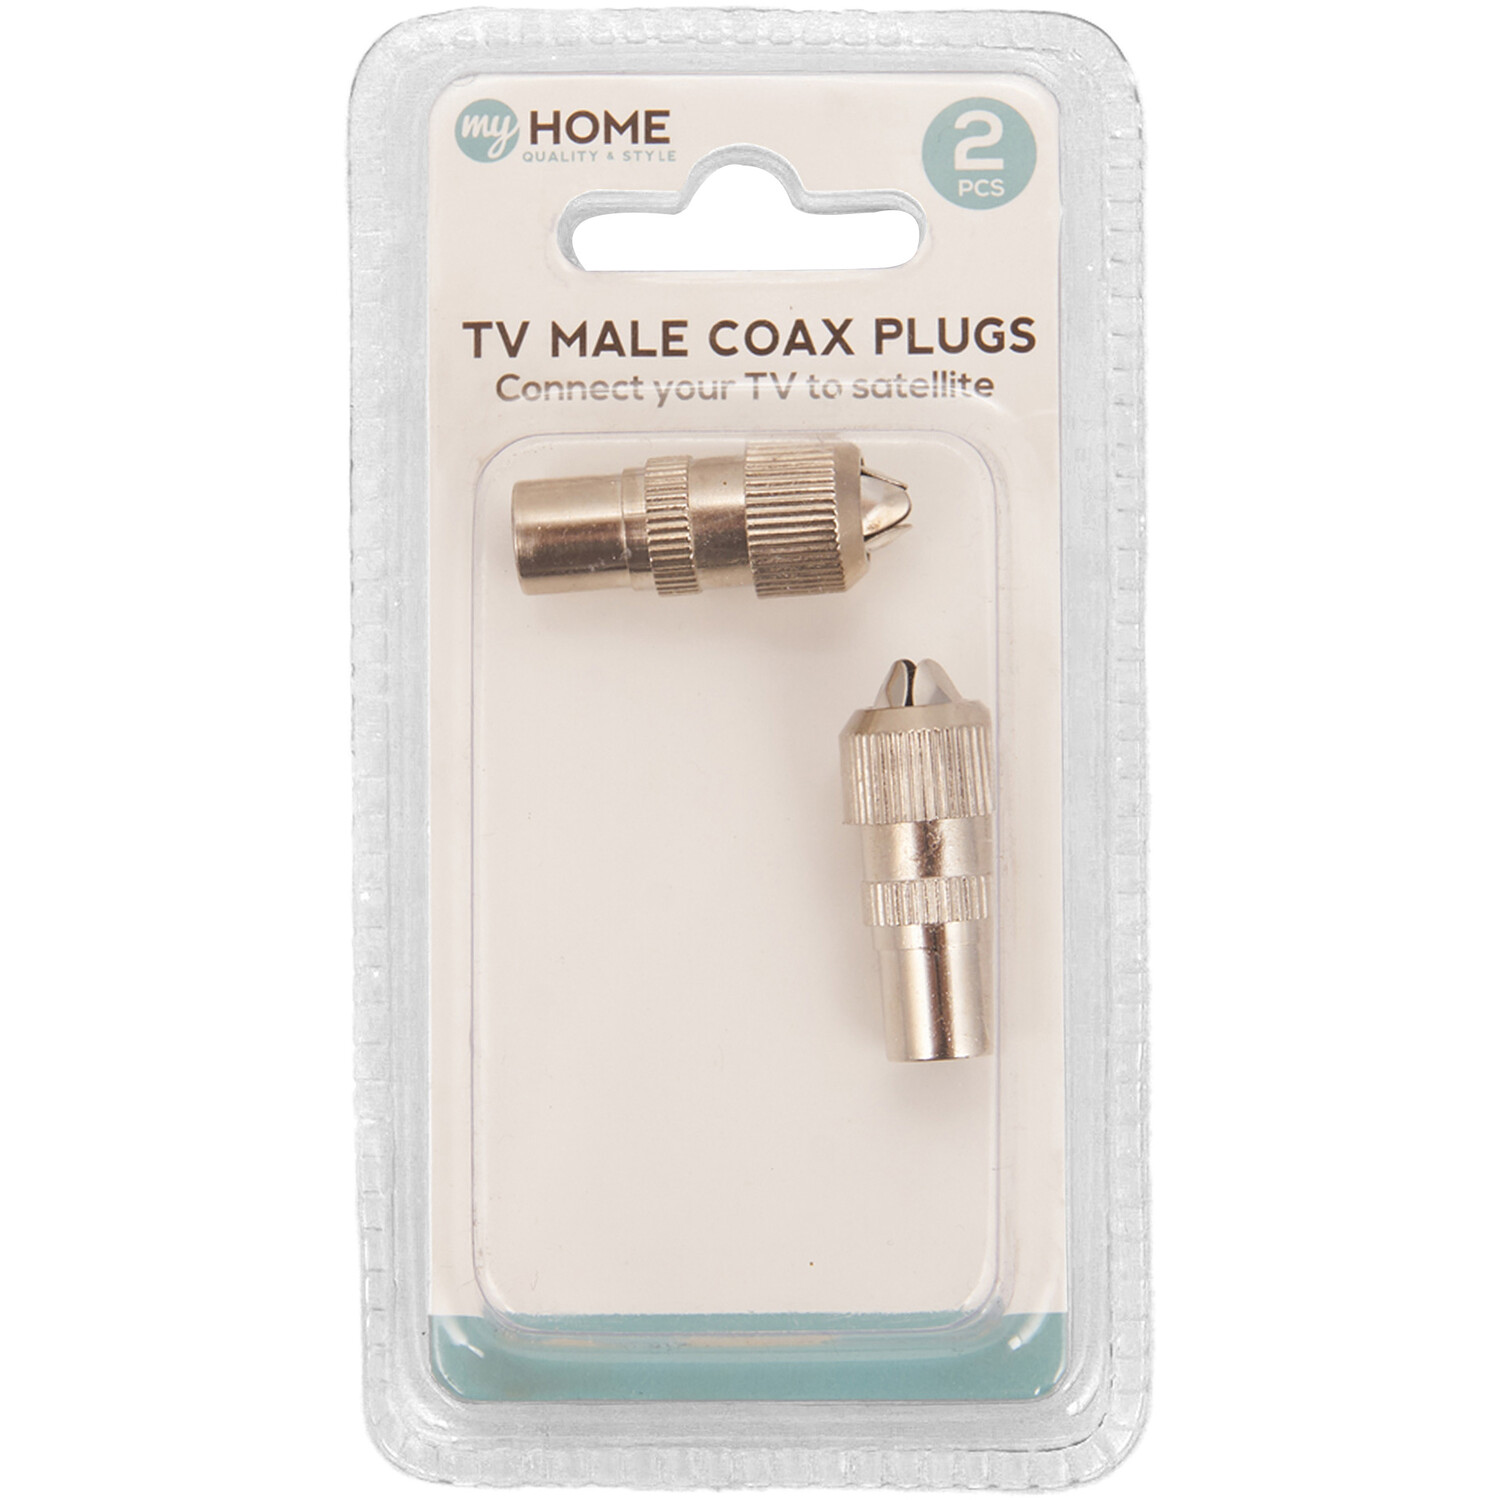 My Home TV Male Coax Plugs 2 Pack Image 1